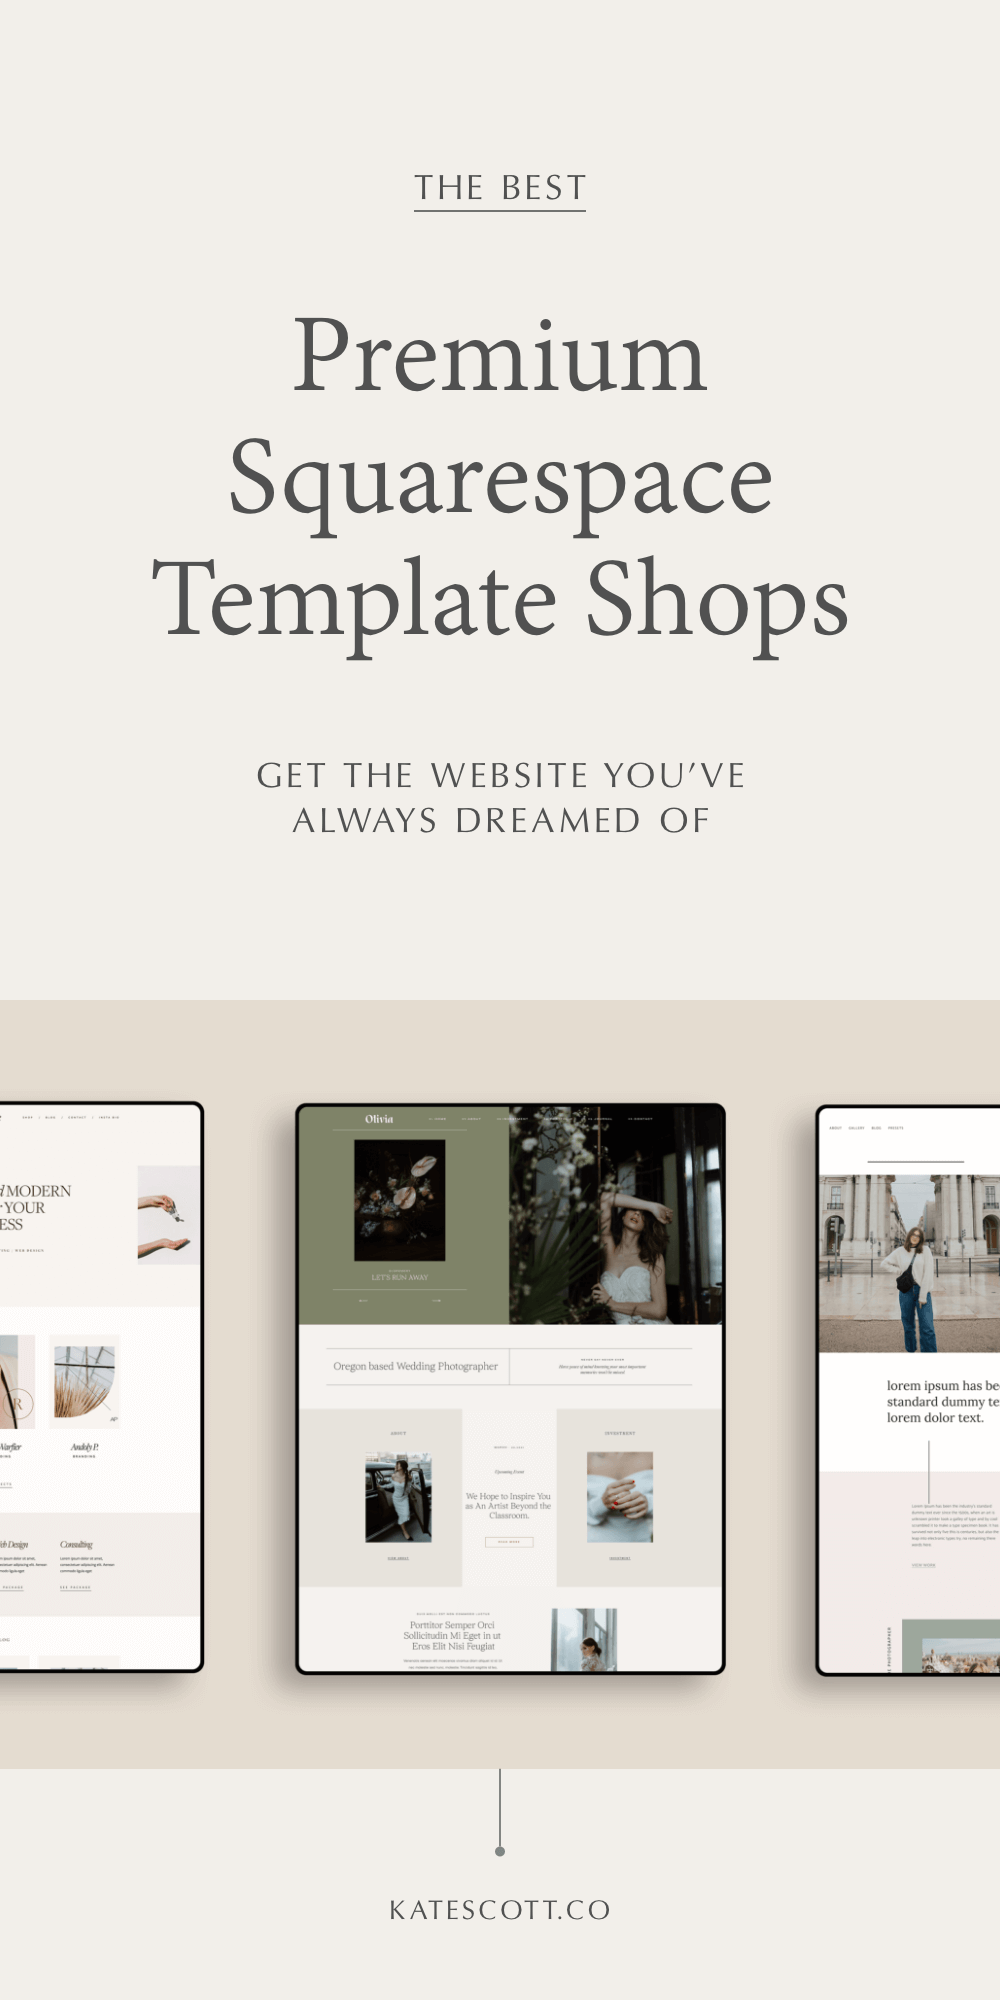 Shopping for a new look for your Squarespace website? Check out these 18 template shops! | Squarespace Template Design | Squarespace Template Business | Squarespace Template Blog | Squarespace Template for Photographers | #squarespace